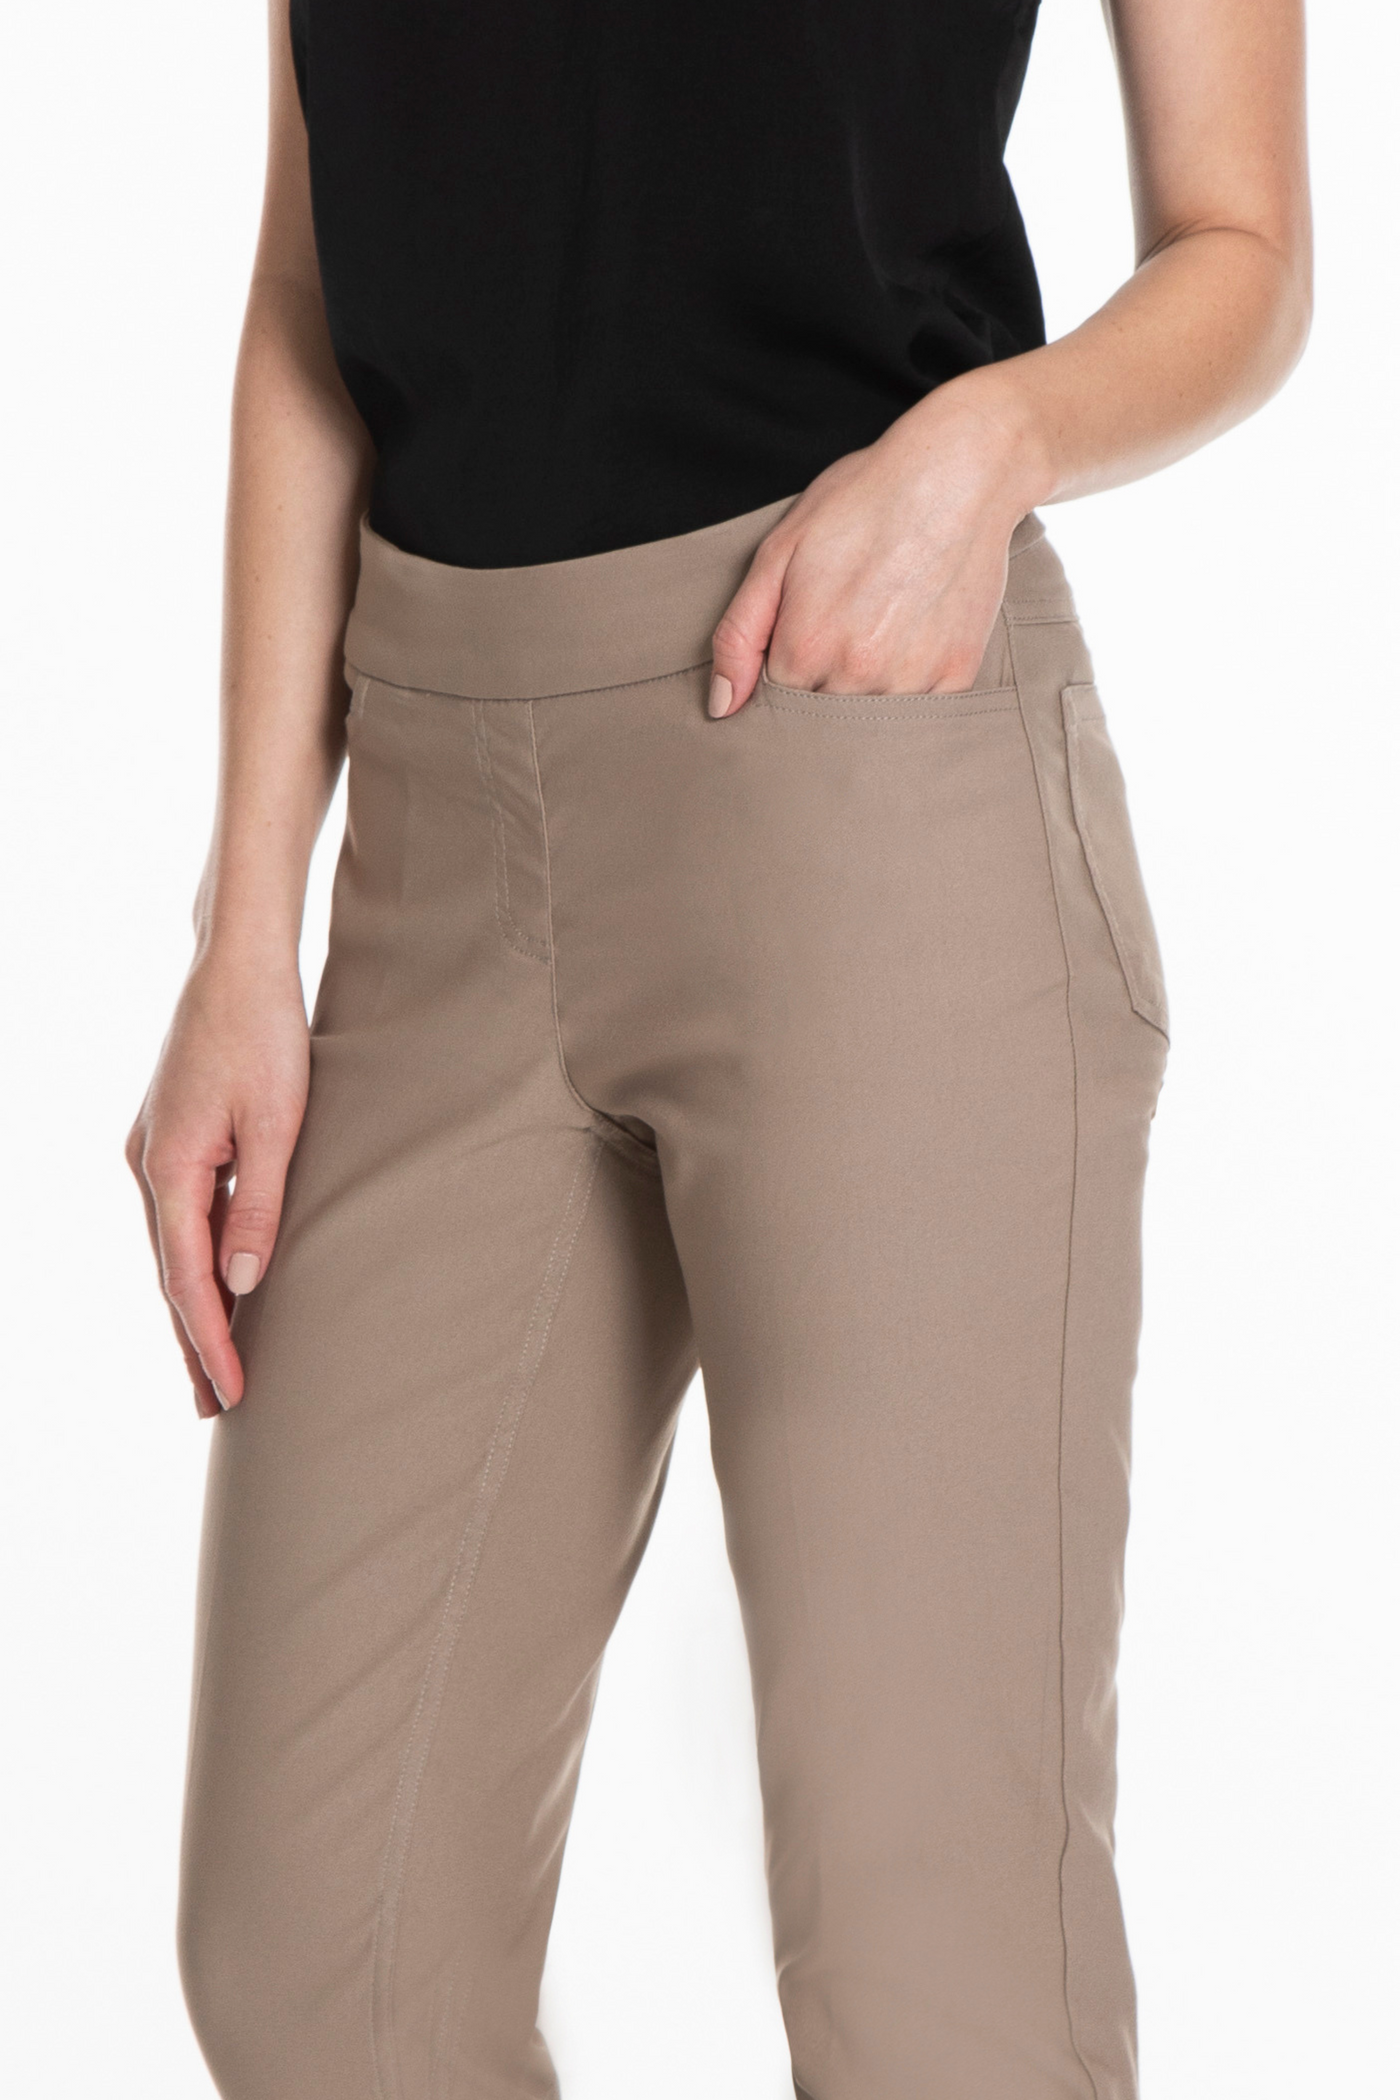 PULL-ON ANKLE PANT with REAL FRONT & BACK POCKETS - Truffle